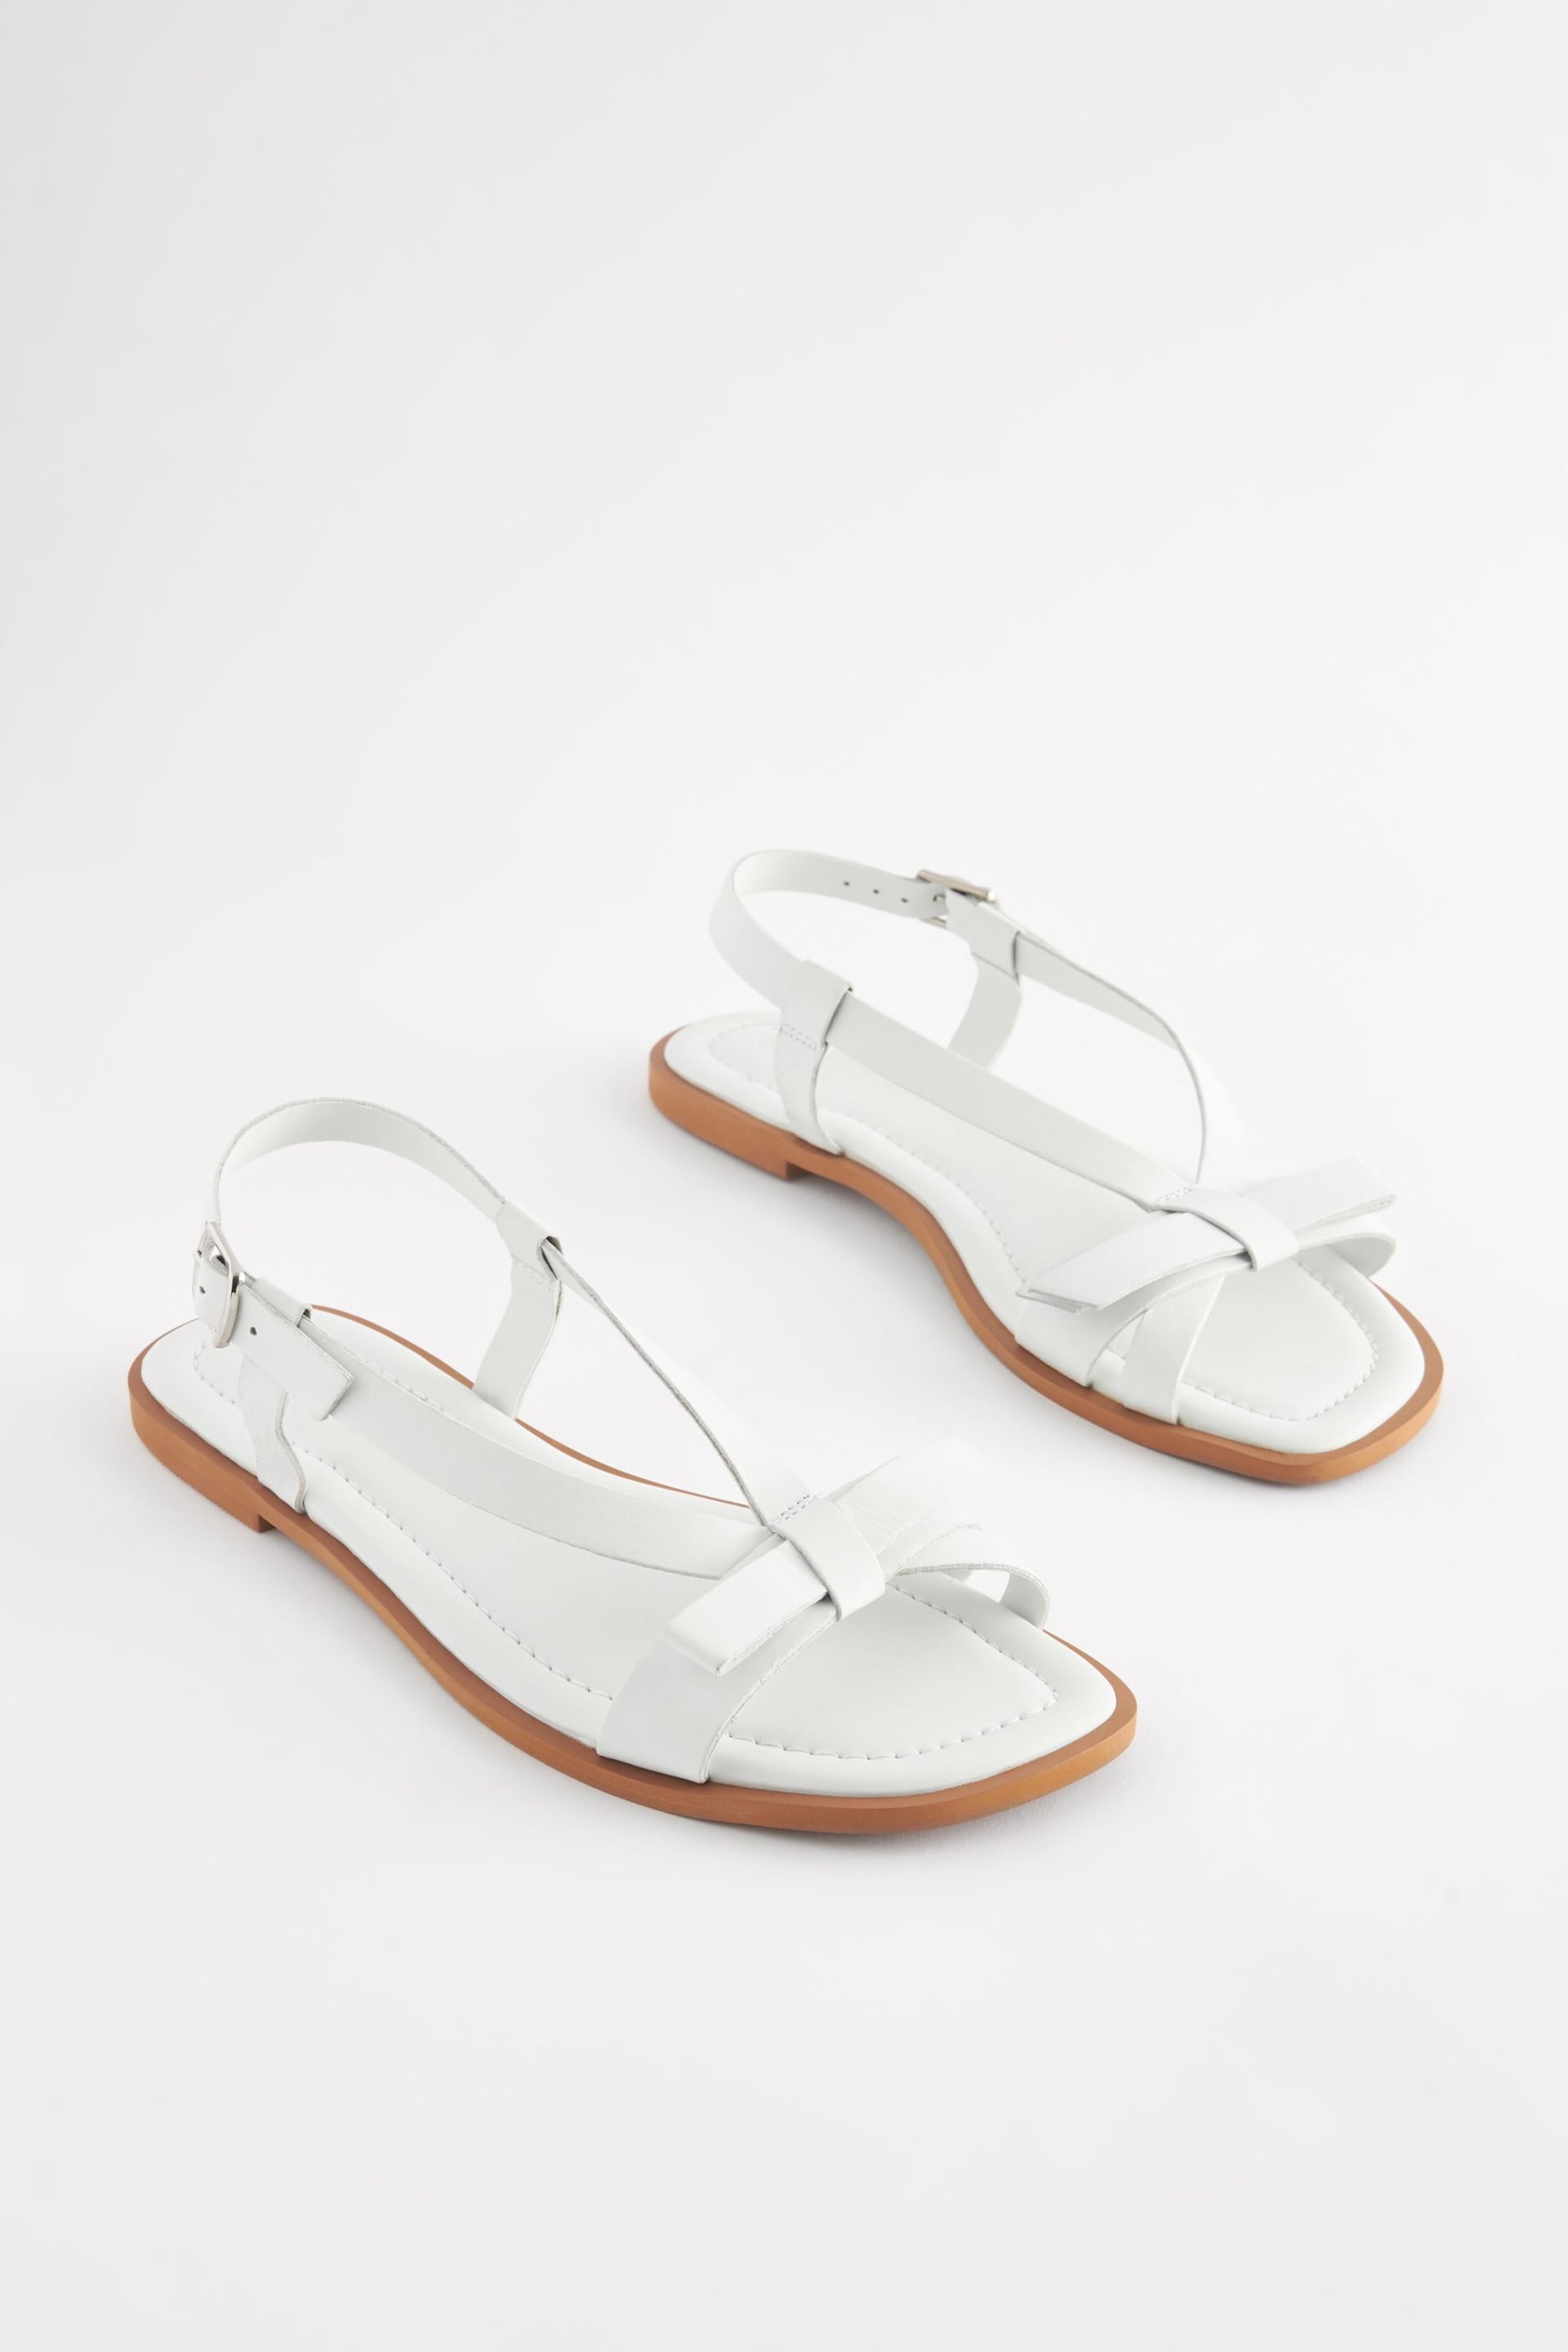 White Regular/Wide Fit Forever Comfort ® Leather Bow Sandals - Image 3 of 7